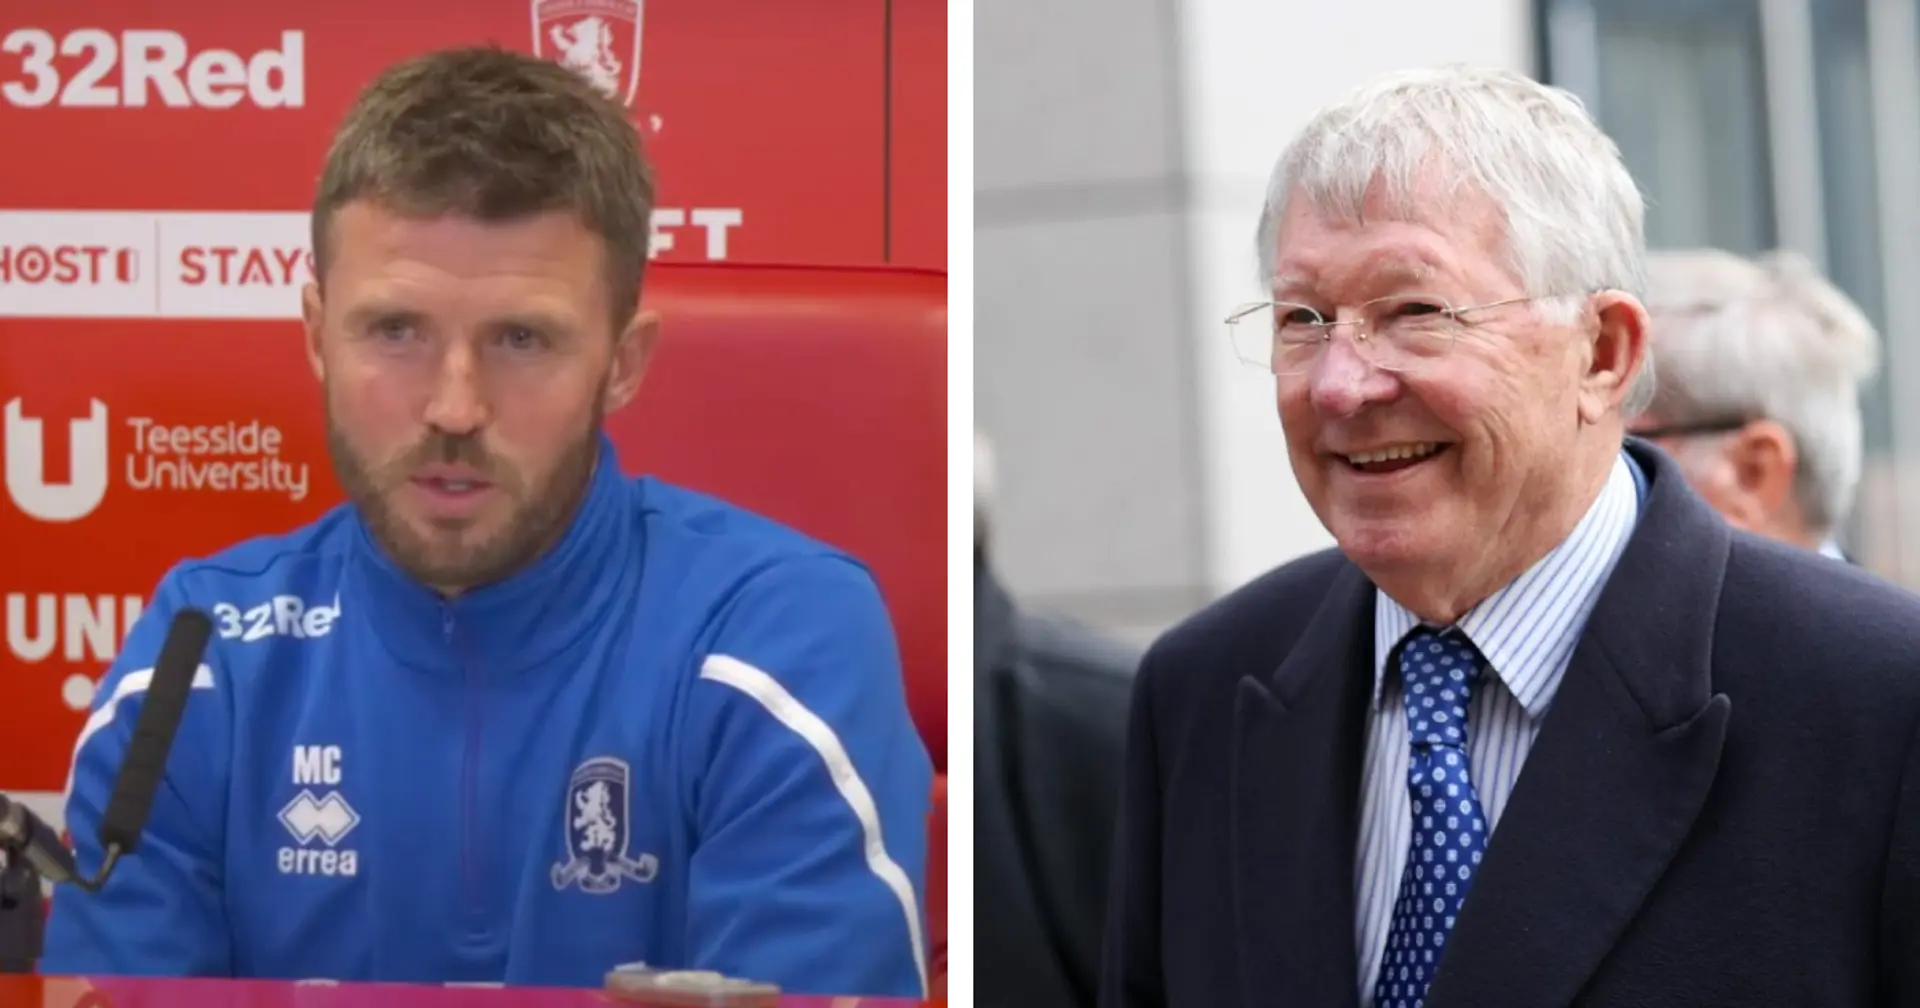 Carrick took Middlesbrough job after chat with Sir Alex & 3 more under-radar stories at Man United today